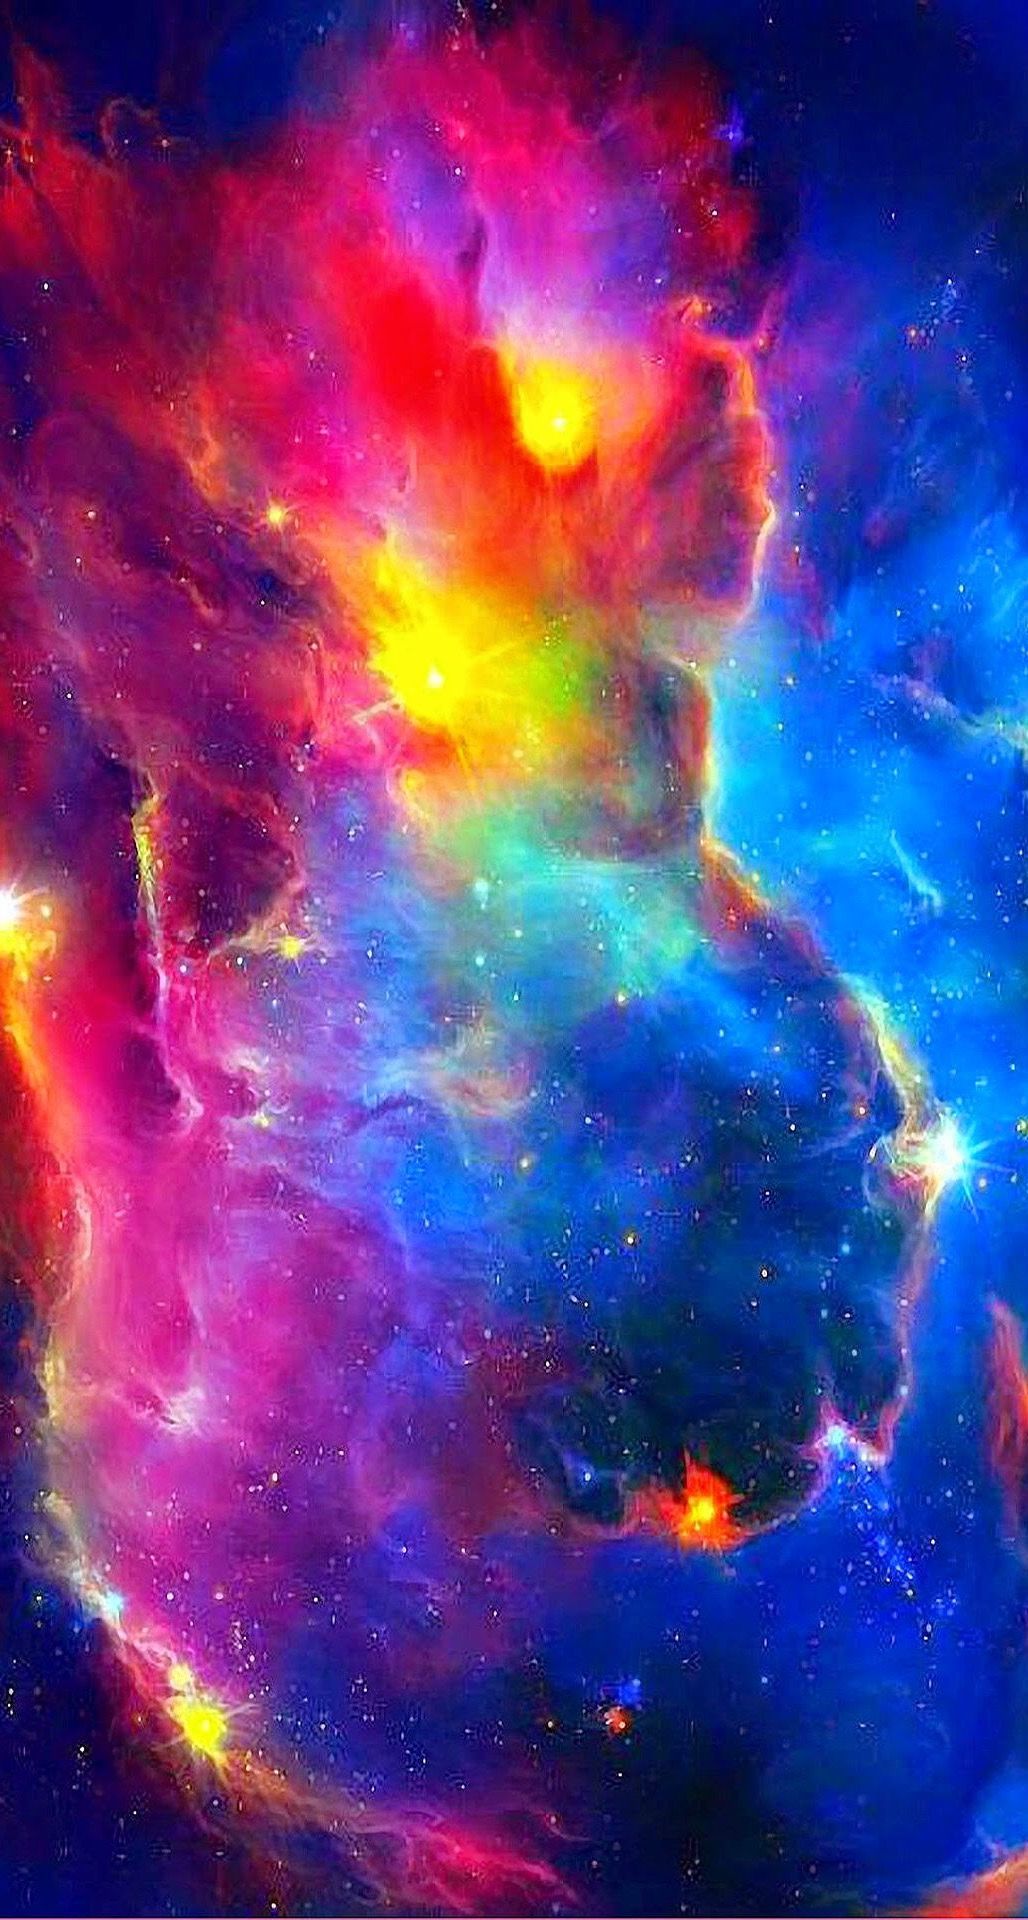 ↑↑TAP AND GET THE FREE APP! Space Galaxy Colorful Astronomy Cool Science Amazing Multicolored Stars Nebula HD iPhone 6. Space iphone wallpaper, Astronomy, Nebula